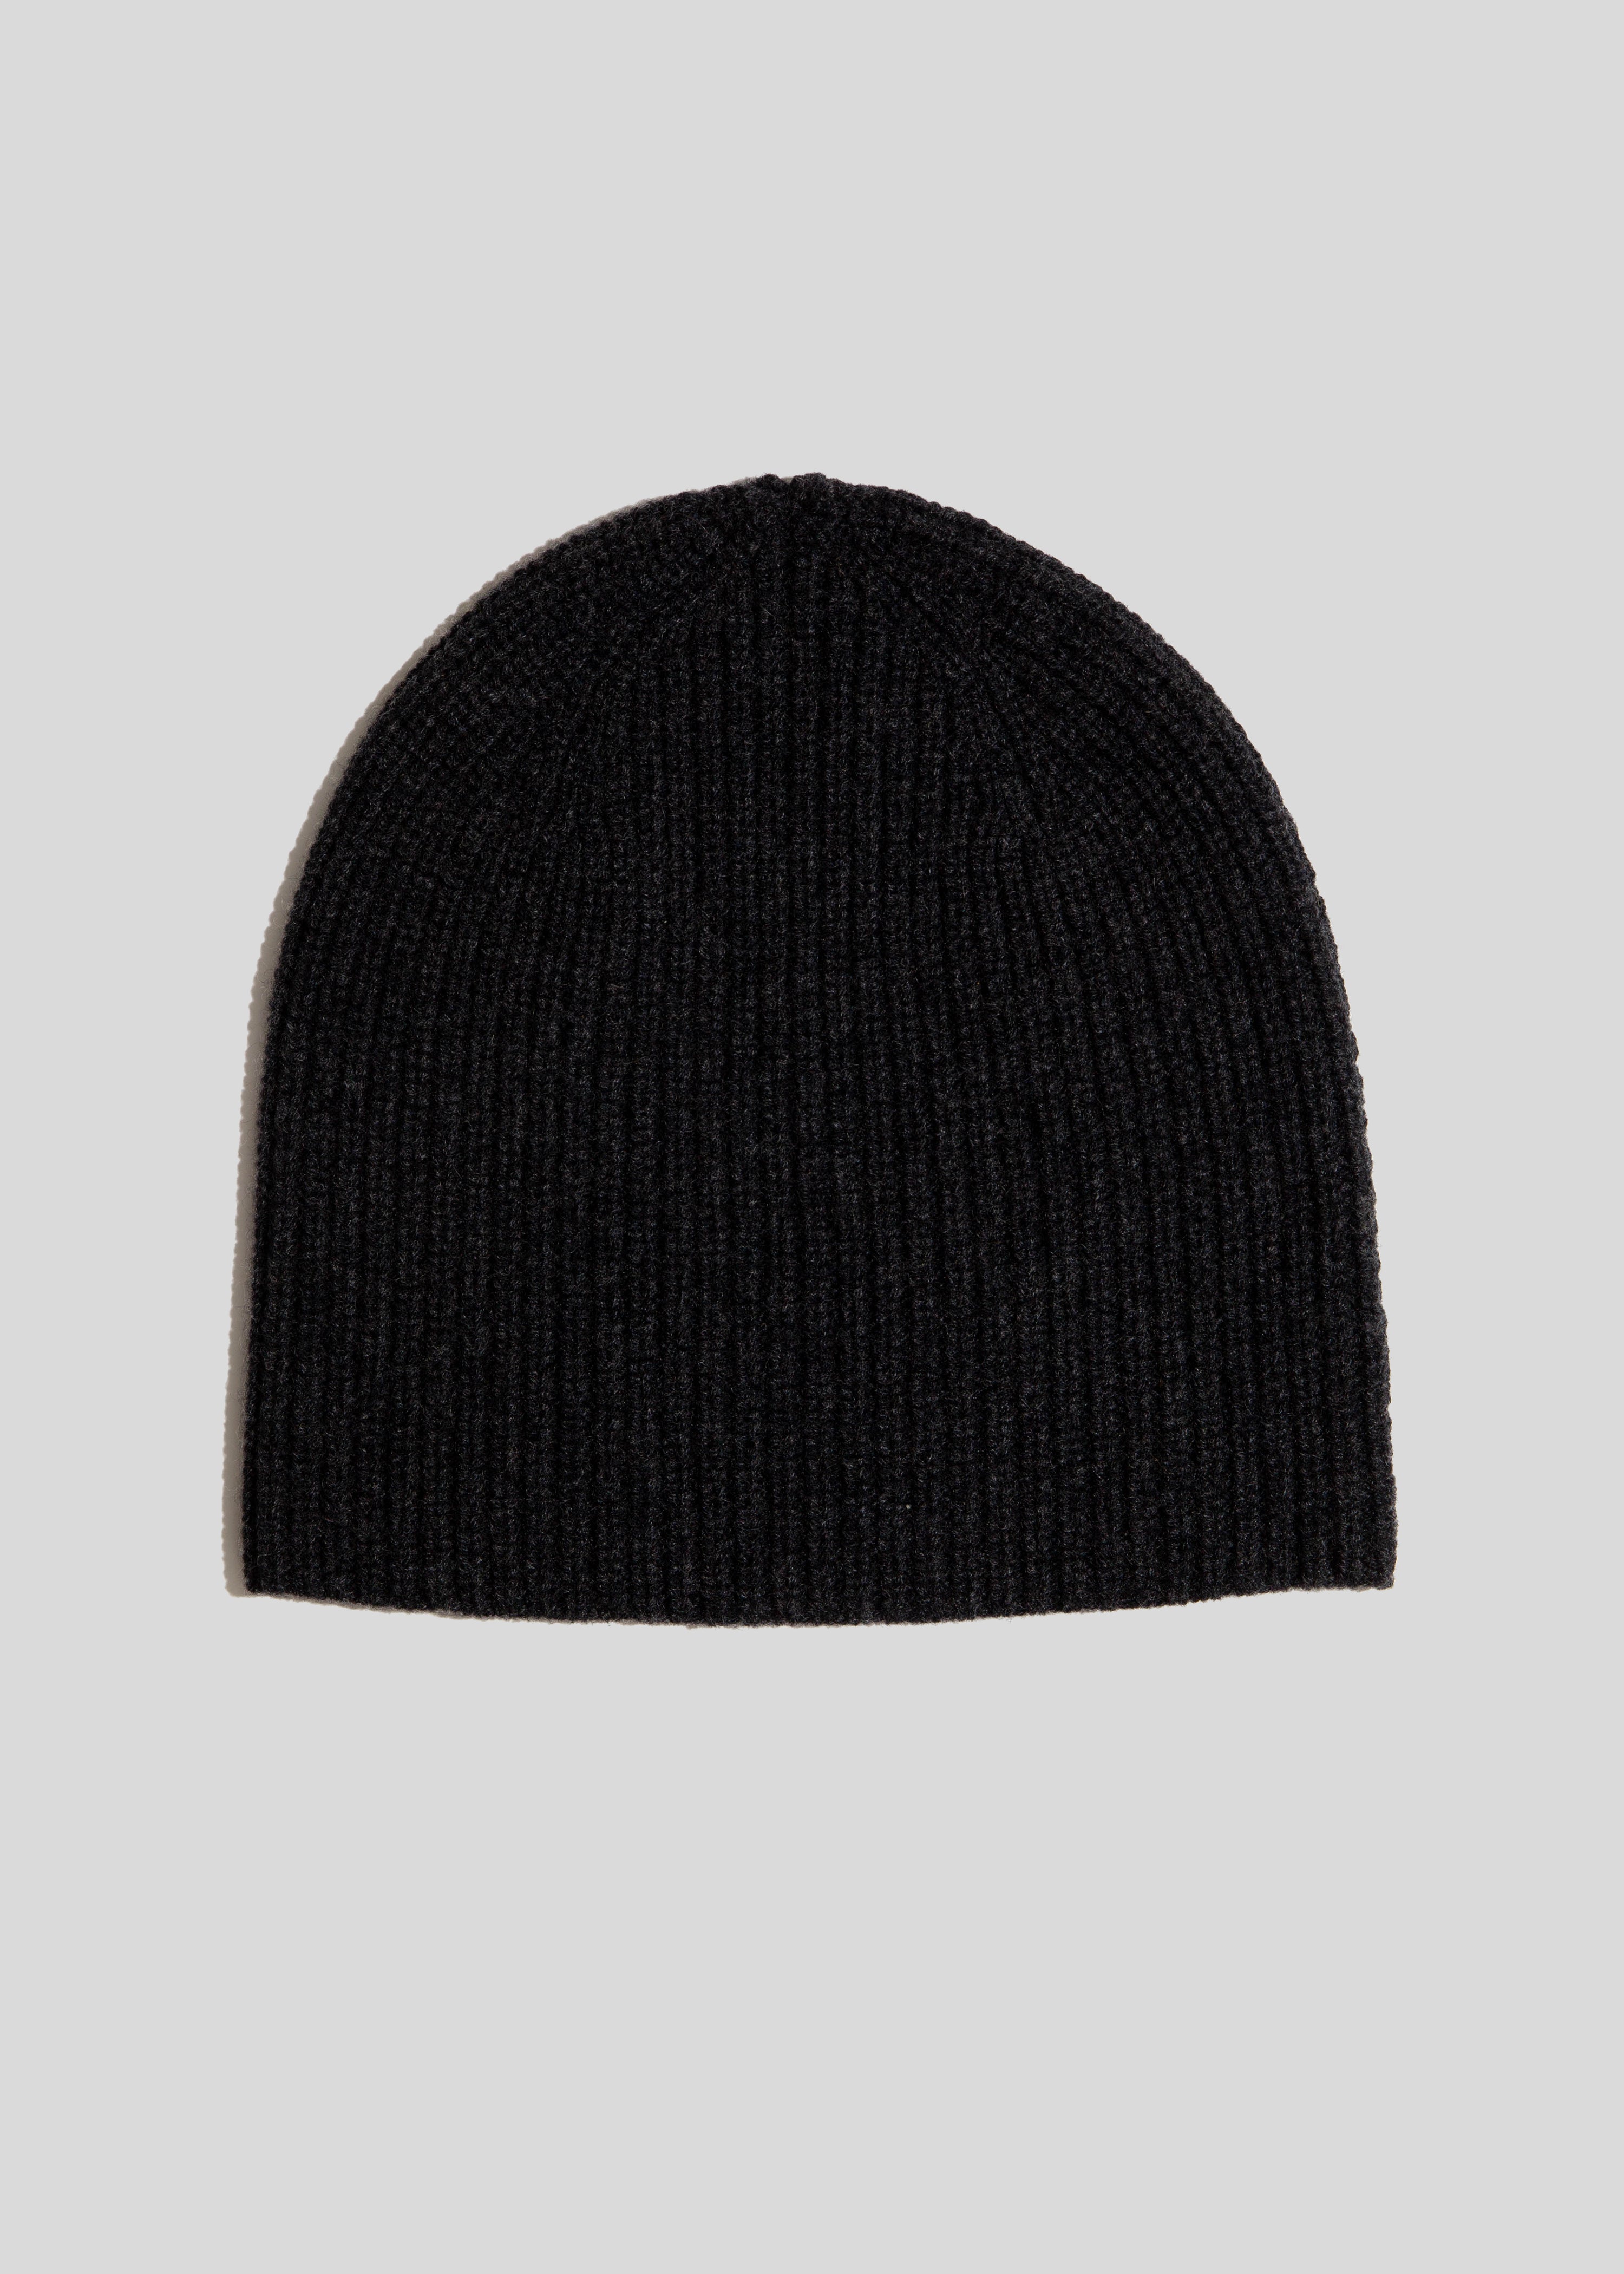 Image of The Cashmere Beanie, Charcoal